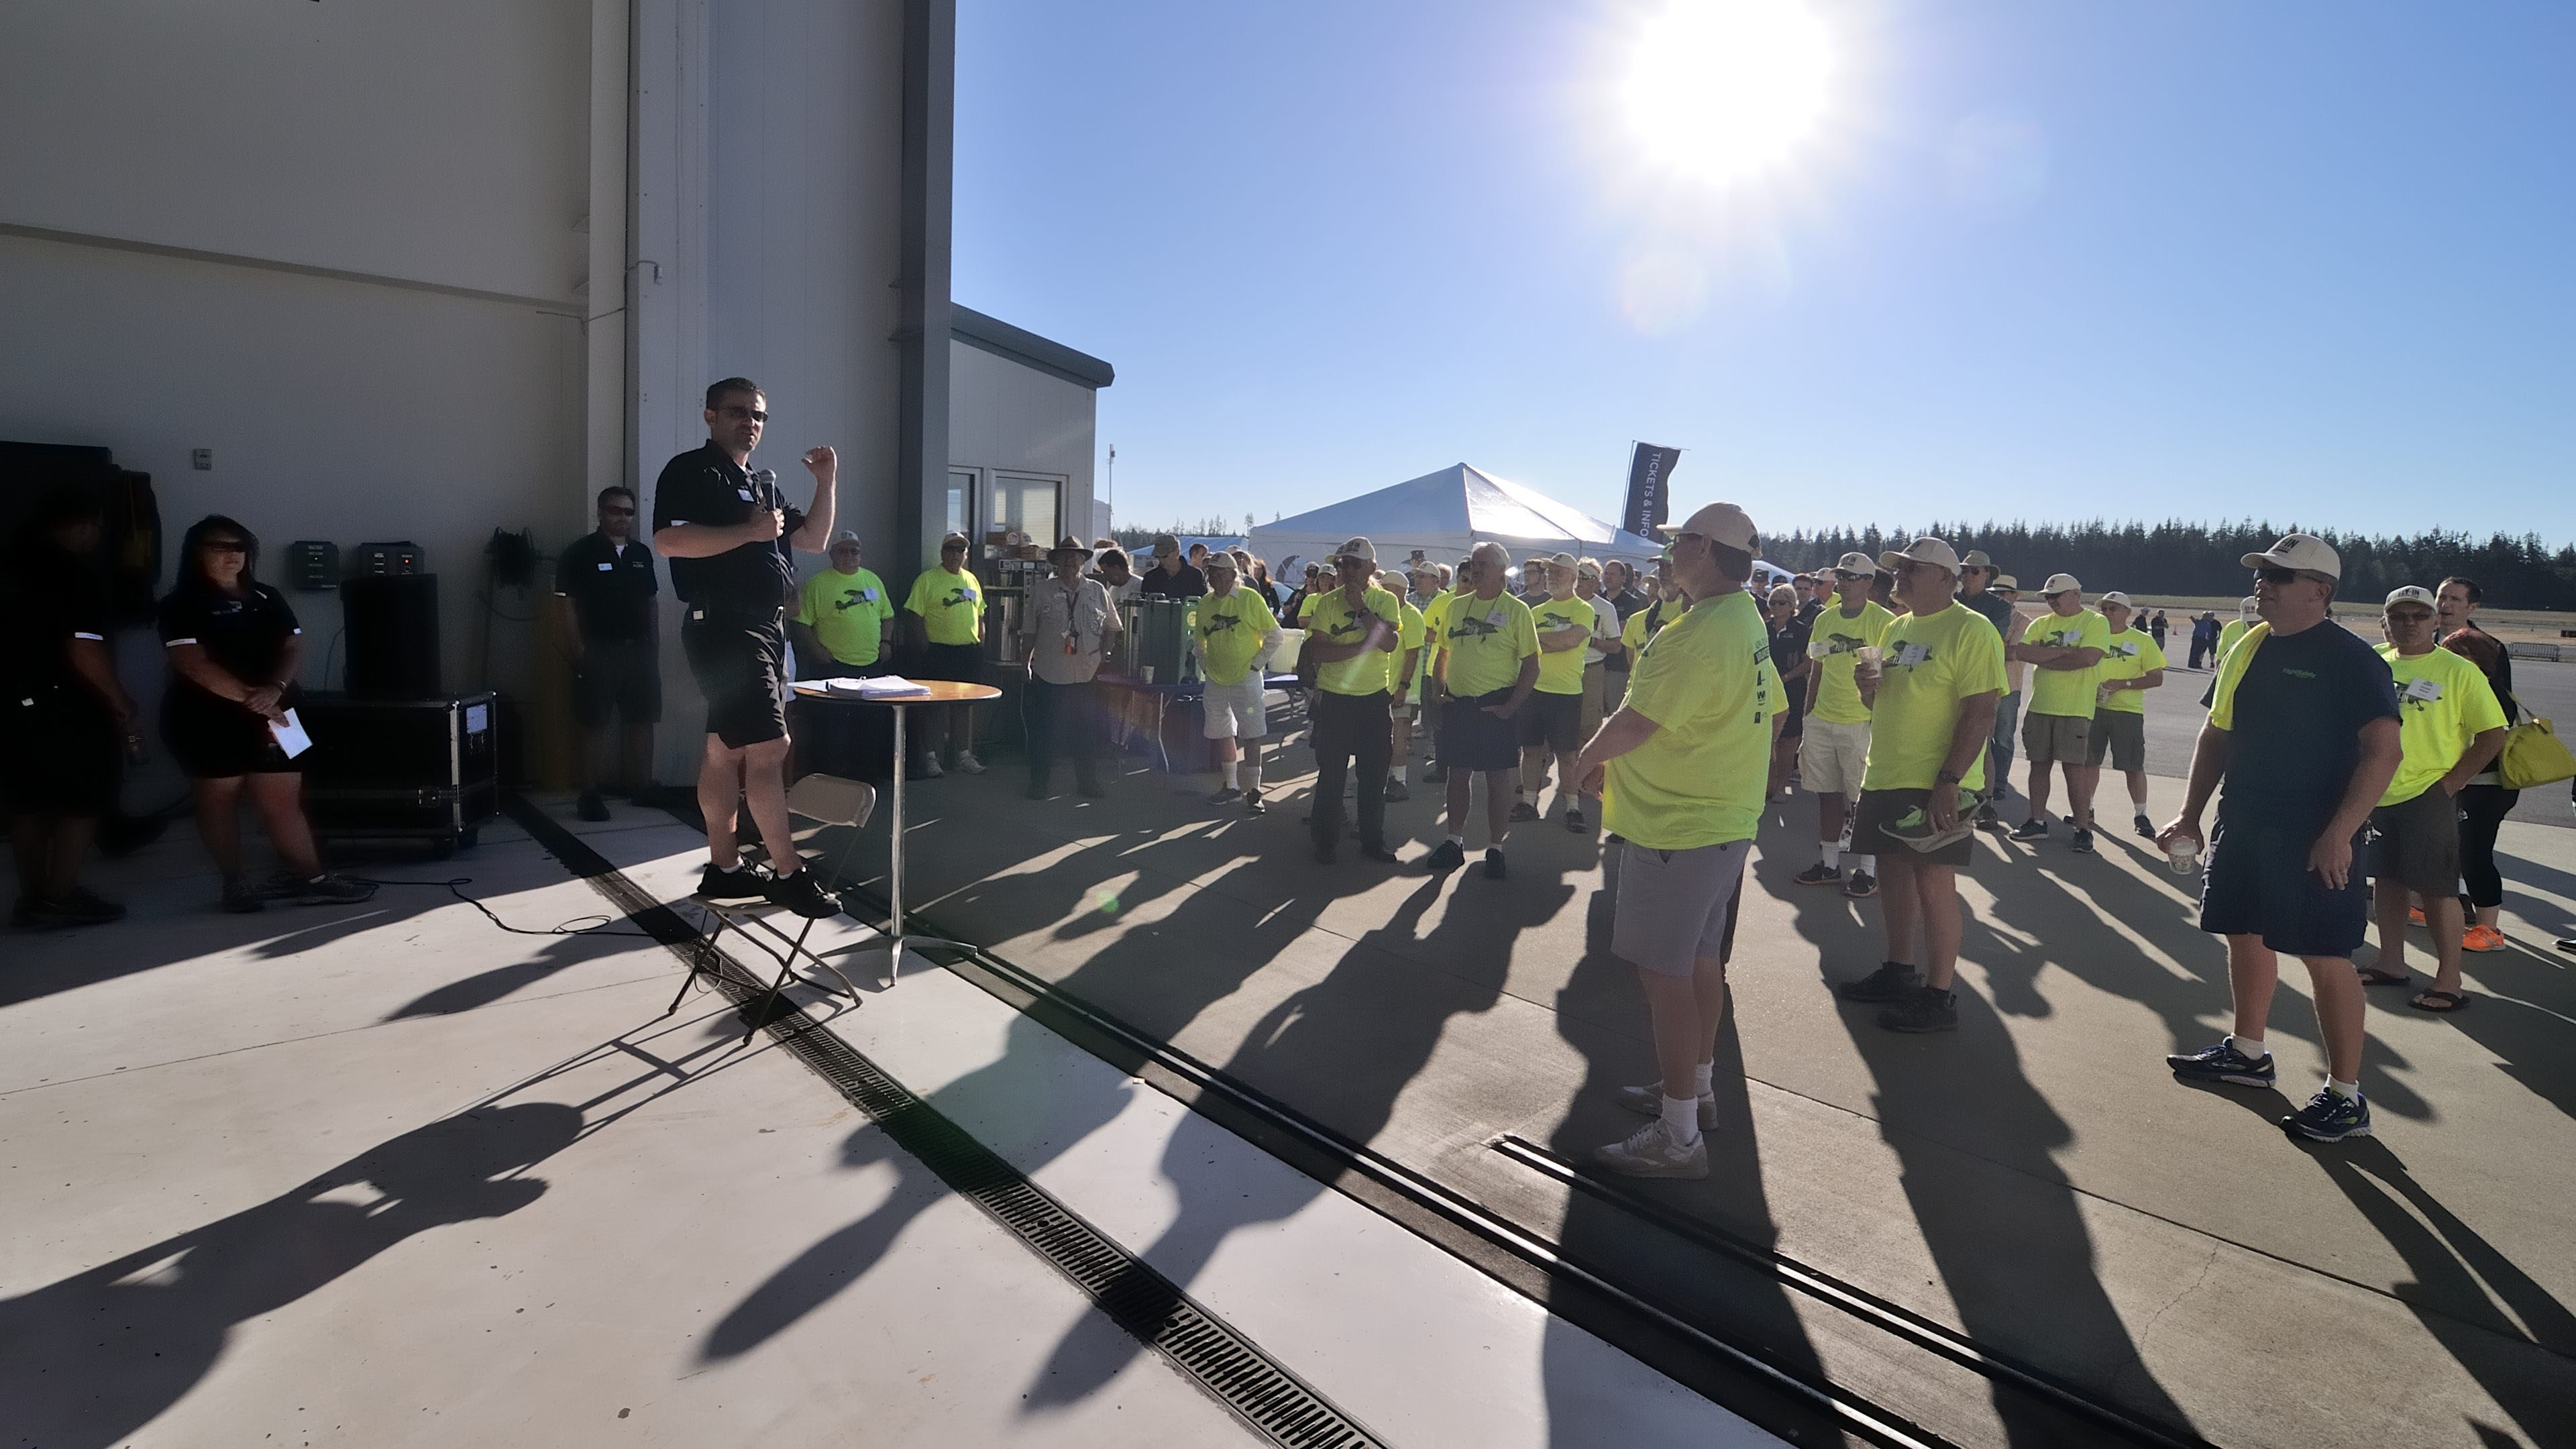 Chris Eads, AOPA director of outreach and events, briefs volunteers before the Bremerton Fly-In. Photo by Mike Collins.